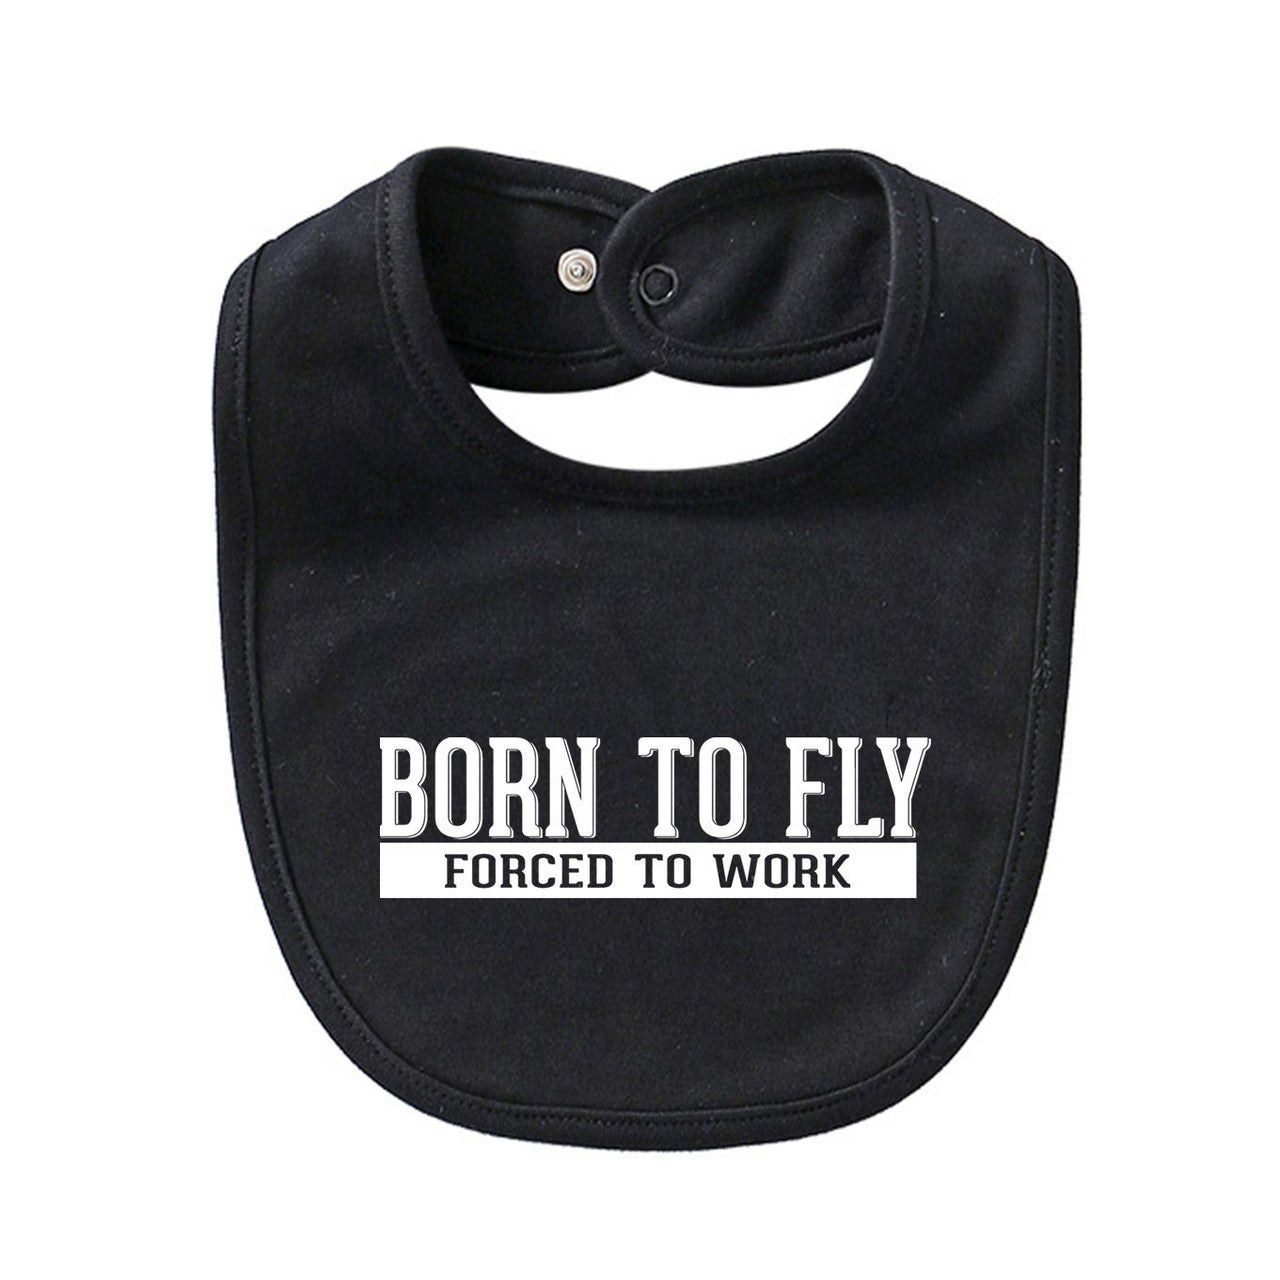 Born To Fly Forced To Work Designed Baby Saliva & Feeding Towels